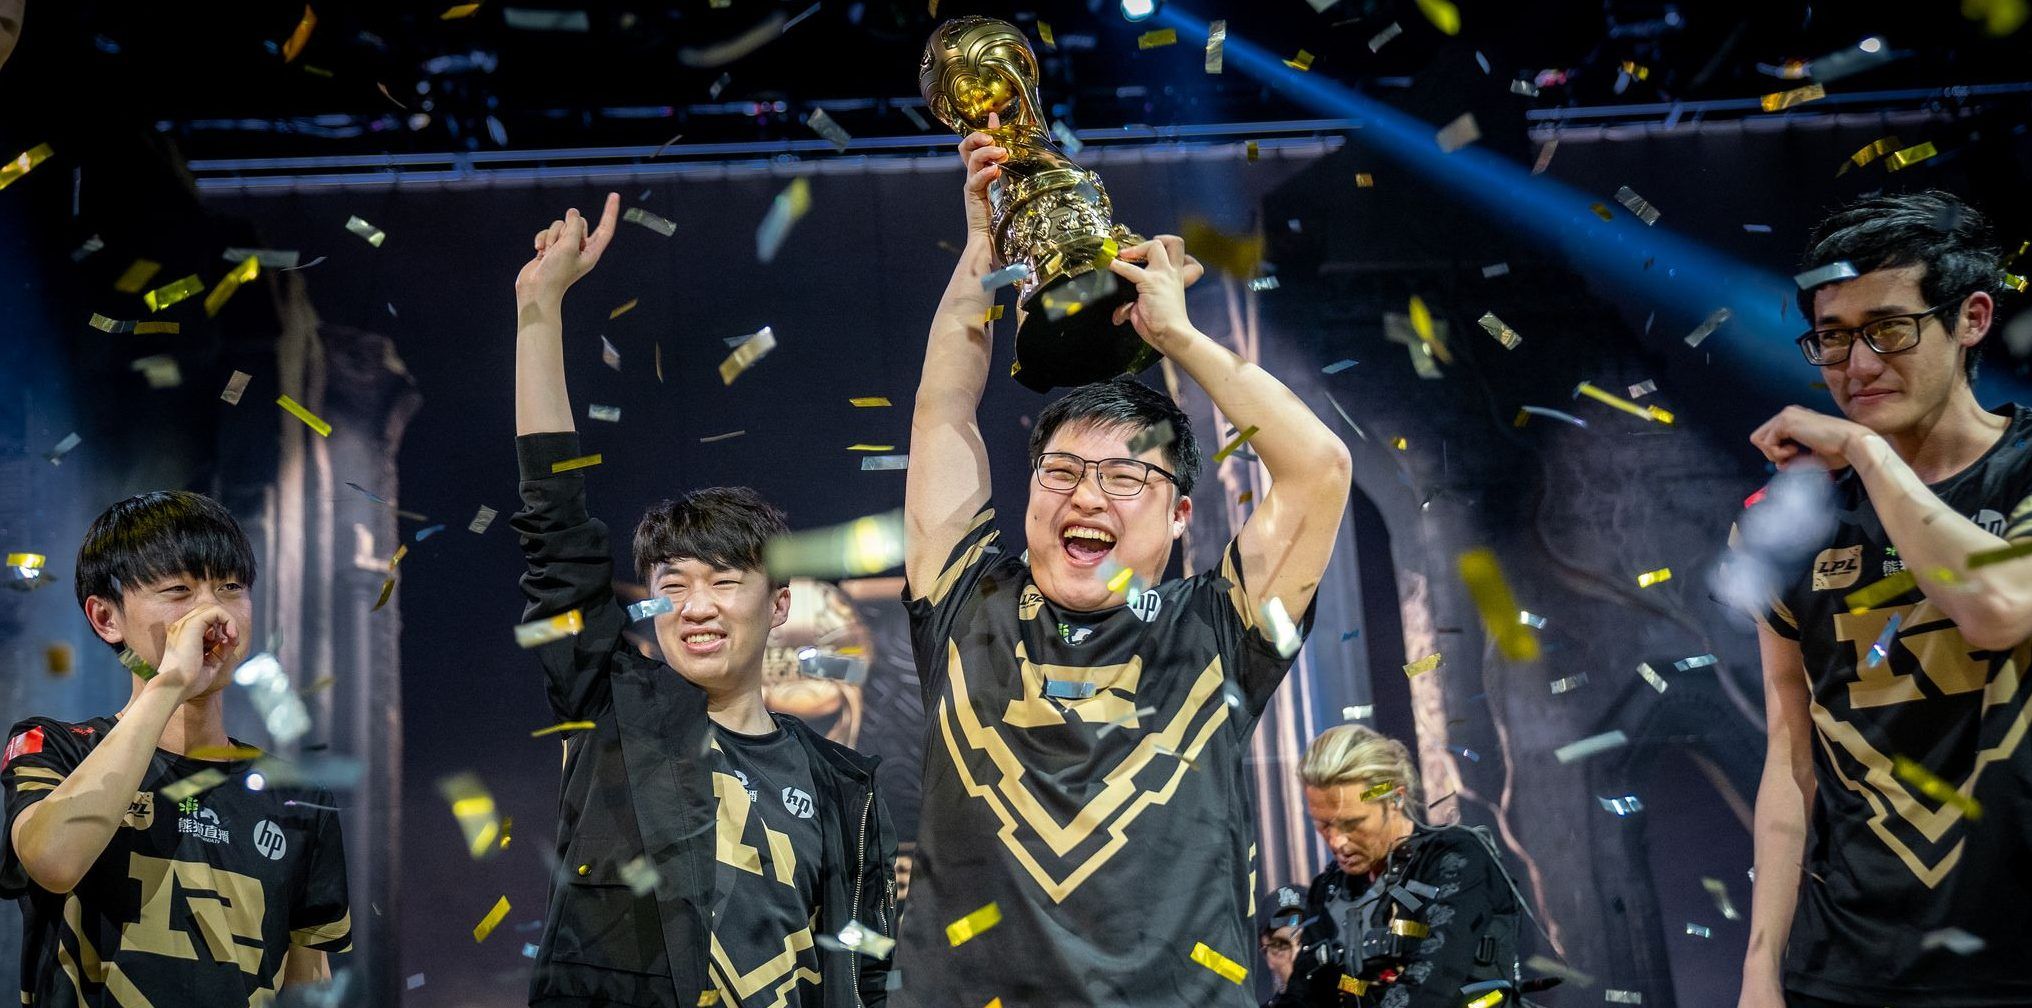 Uzi, star ADC of RNG holding the MSI trophy